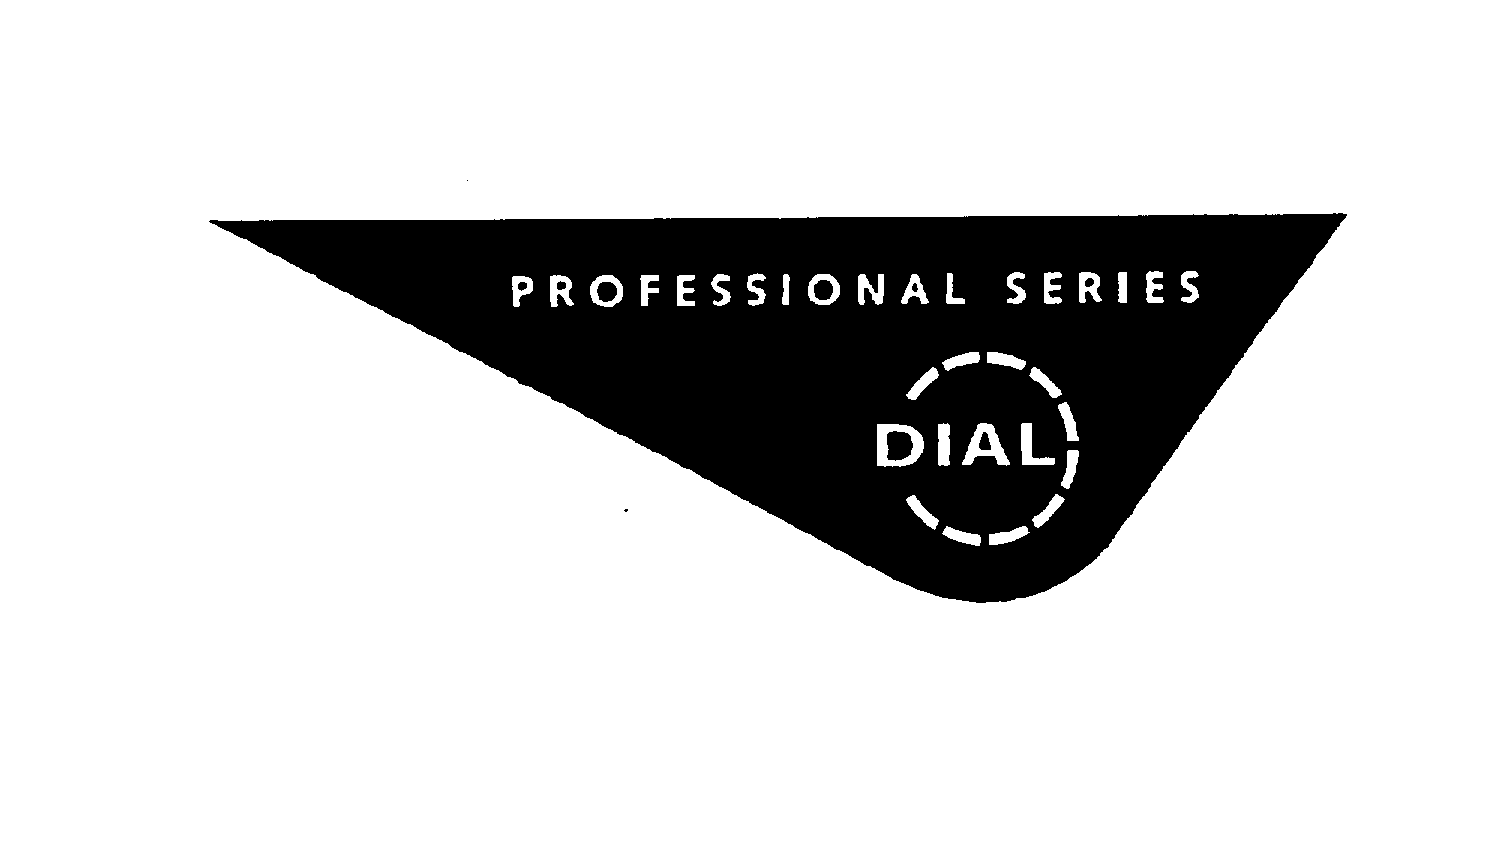  PROFESSIONAL SERIES DIAL